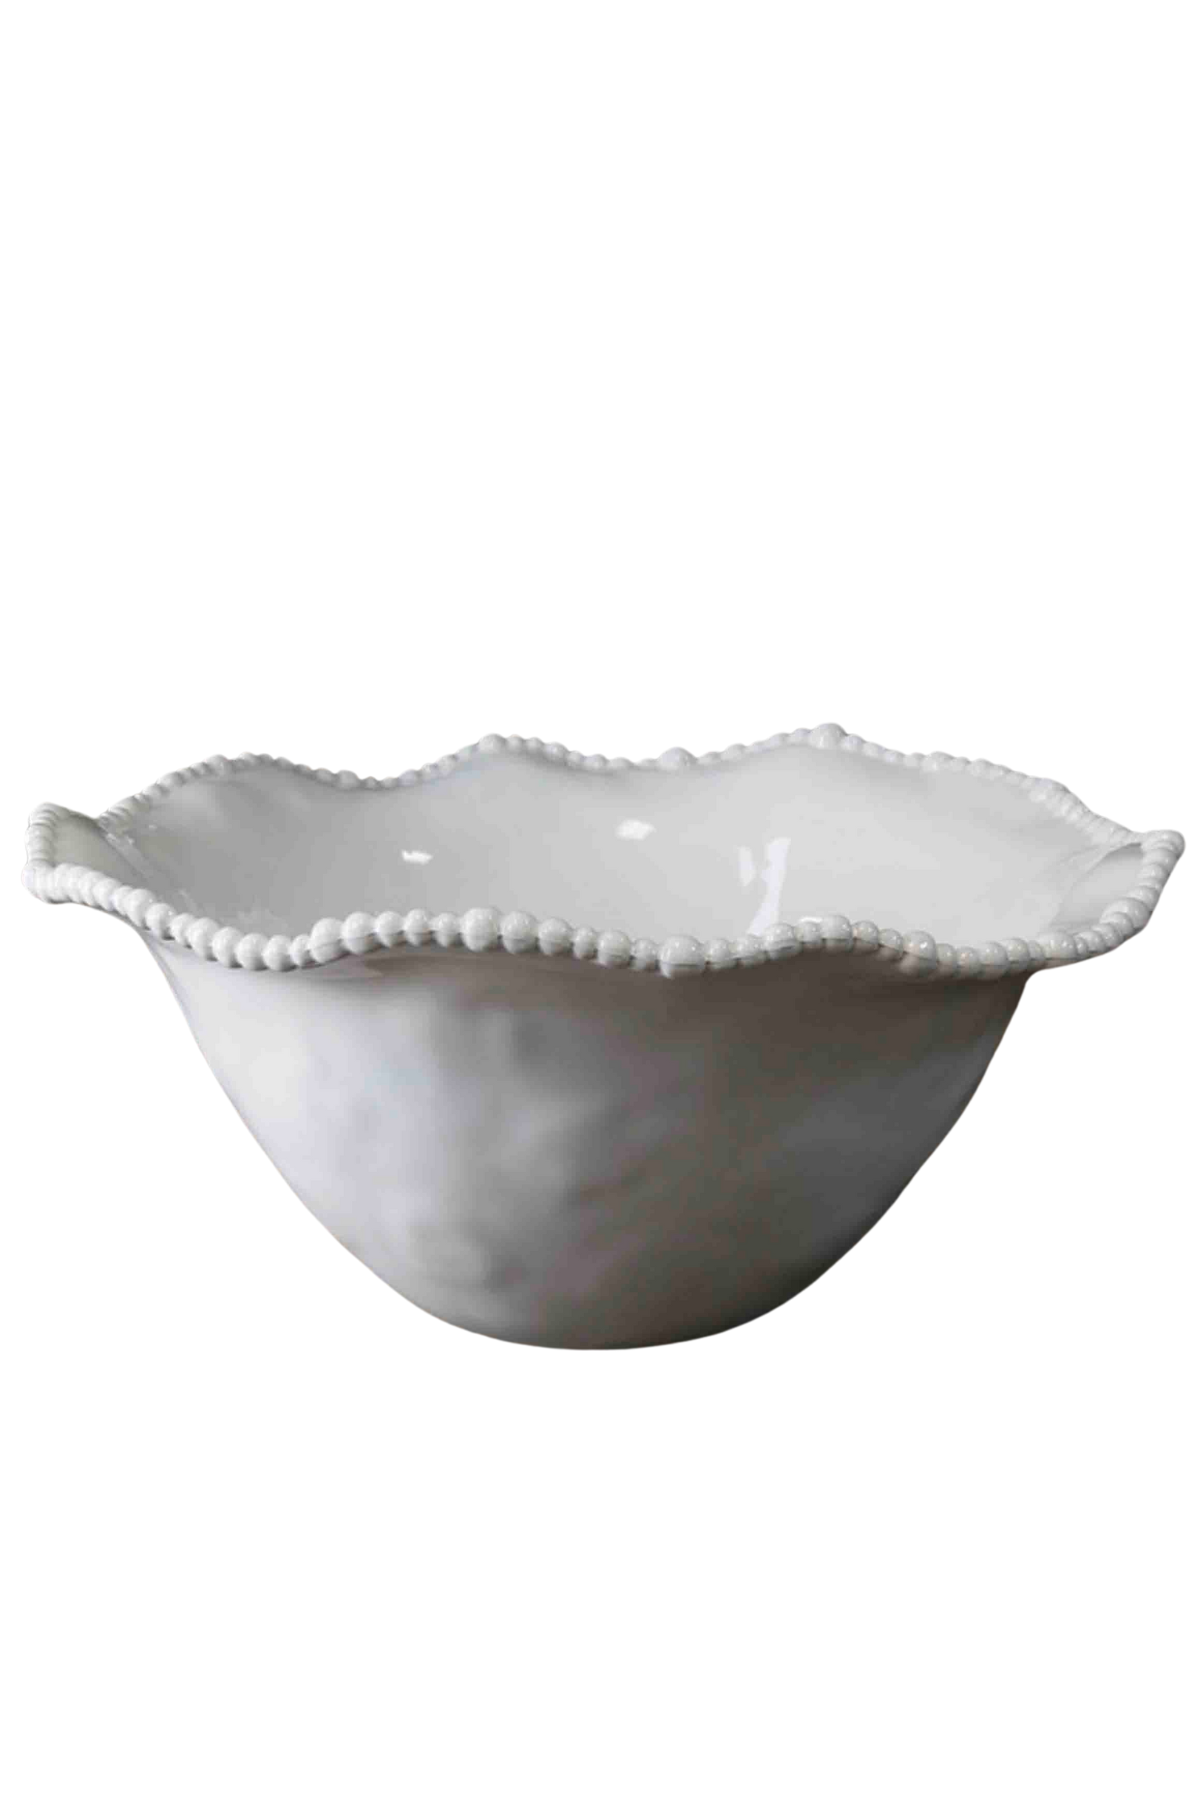  White Luxury VIDA Alegria Large Bowl by Beatrix Ball with Pearl rimmed detail